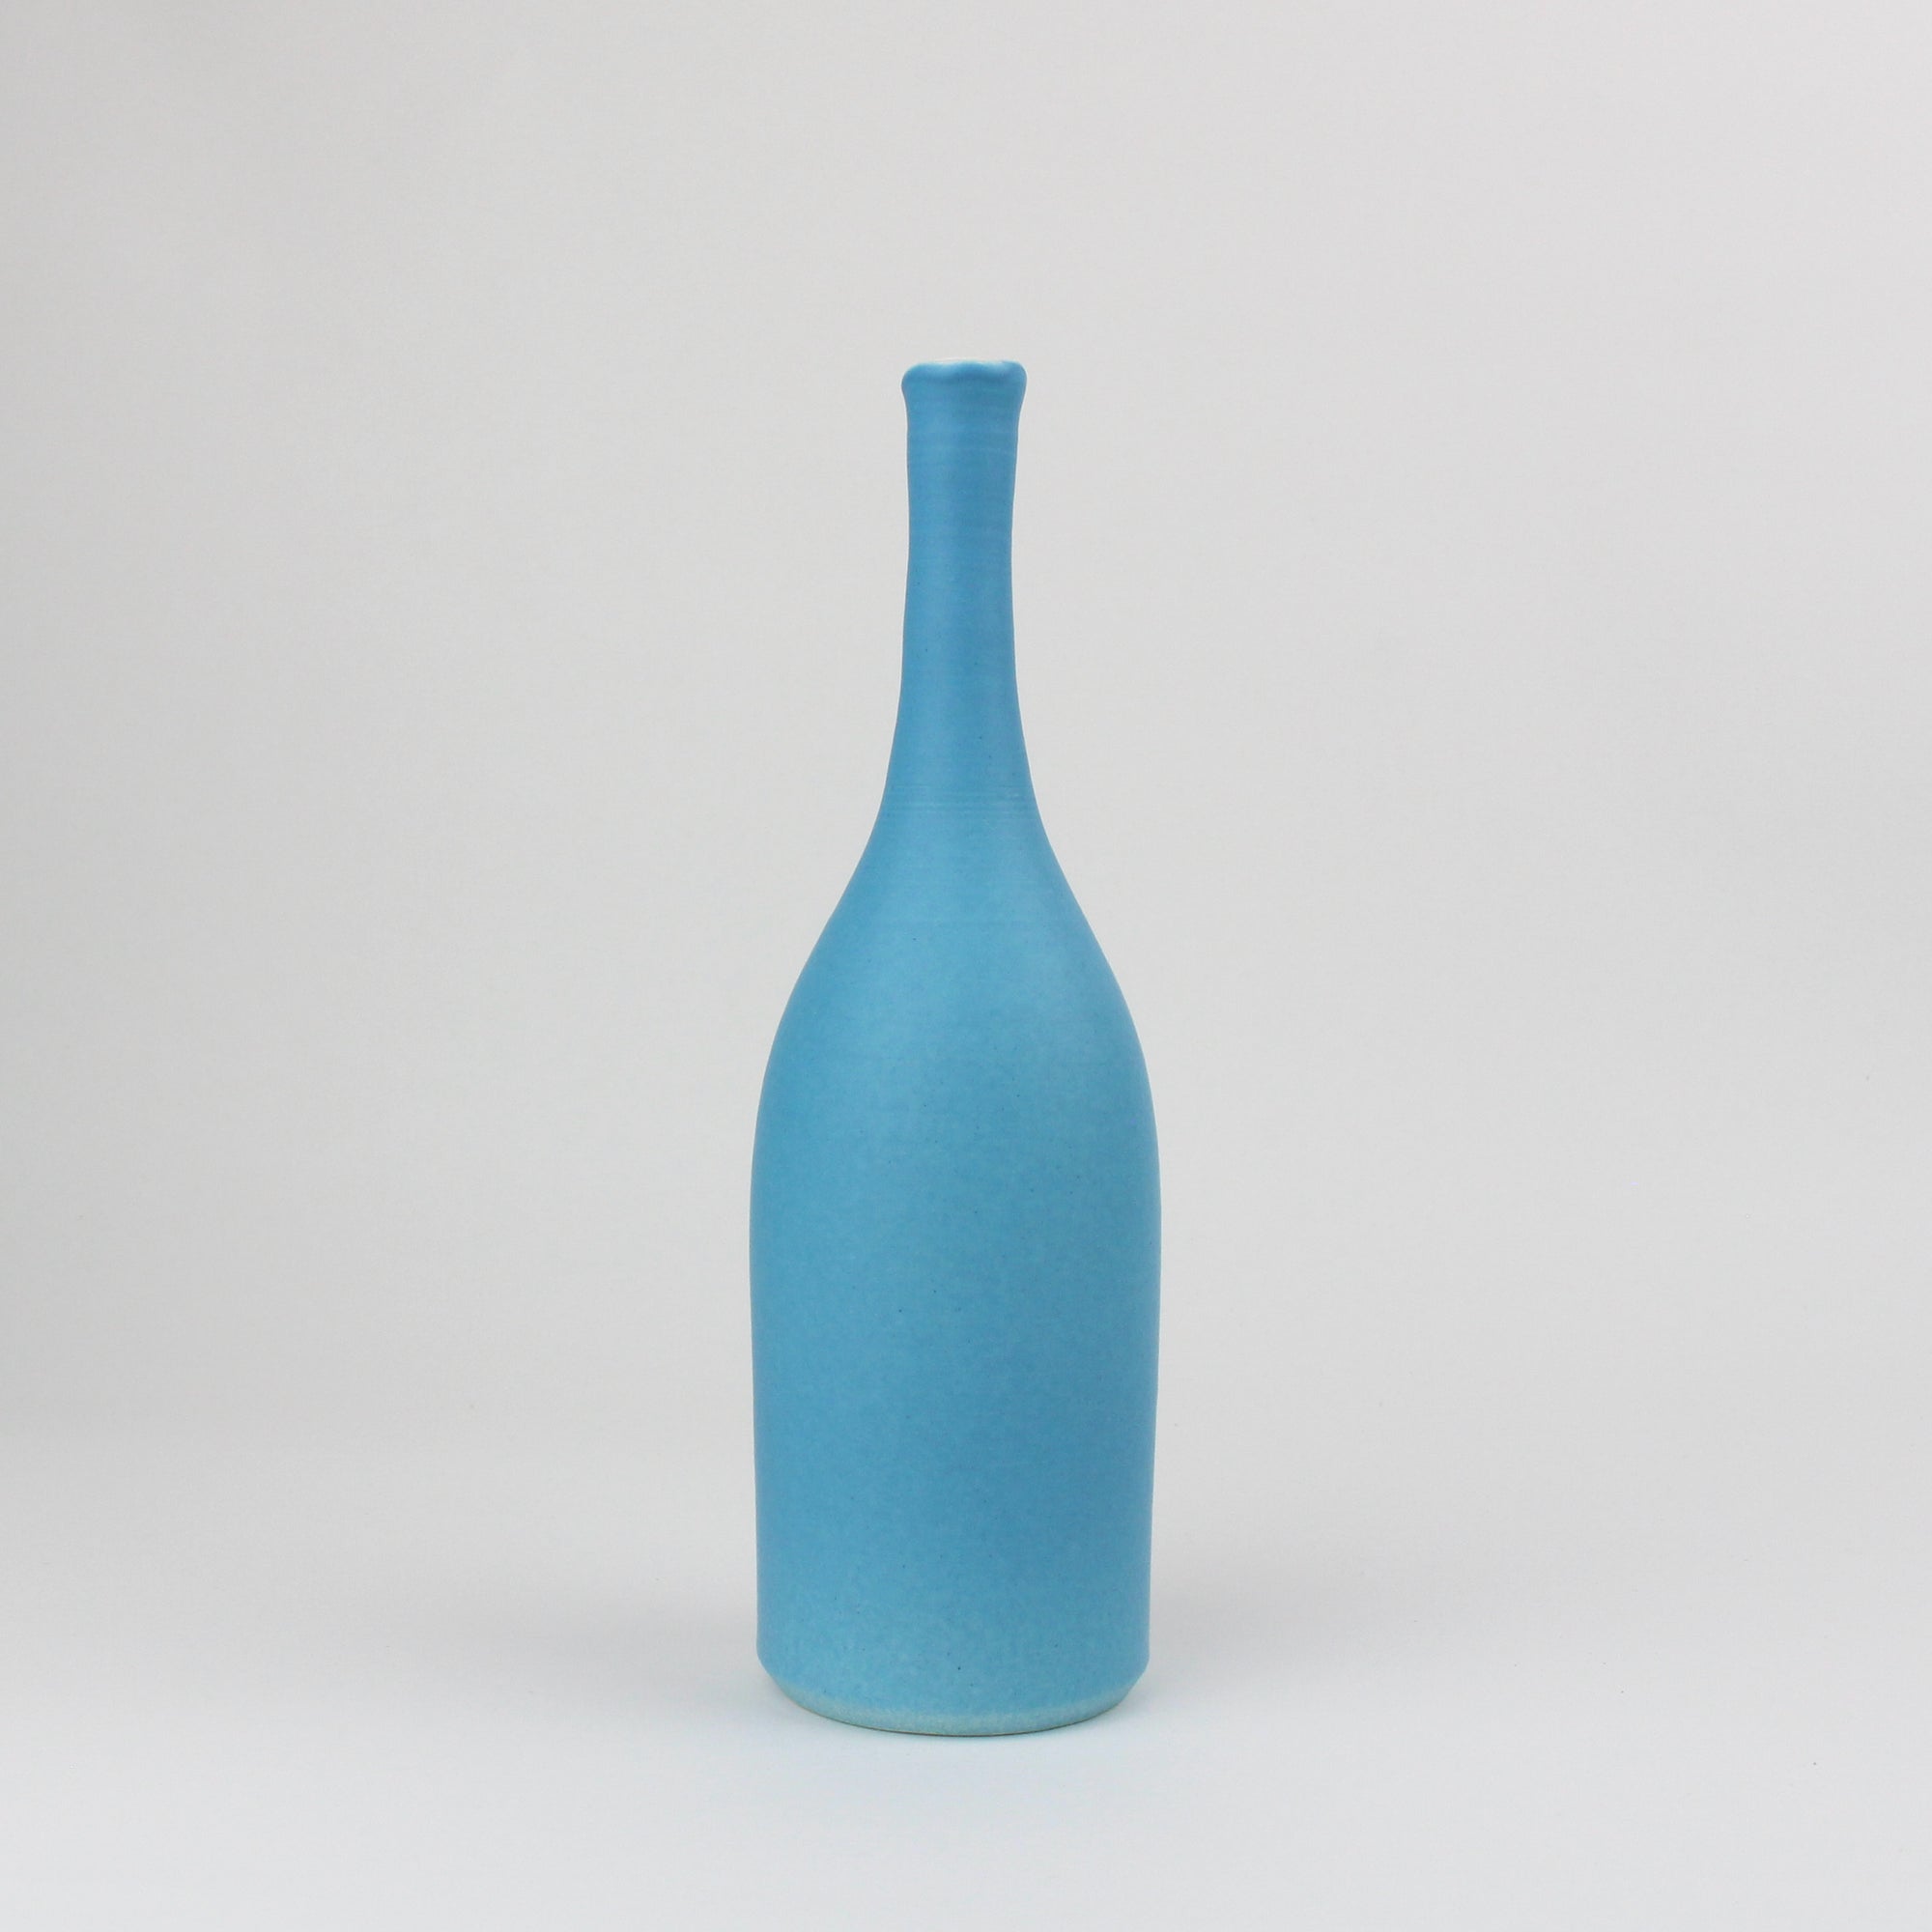 LB174 Bright Turquoise Bottle by Lucy Burley, available at Padstow Gallery, Cornwall